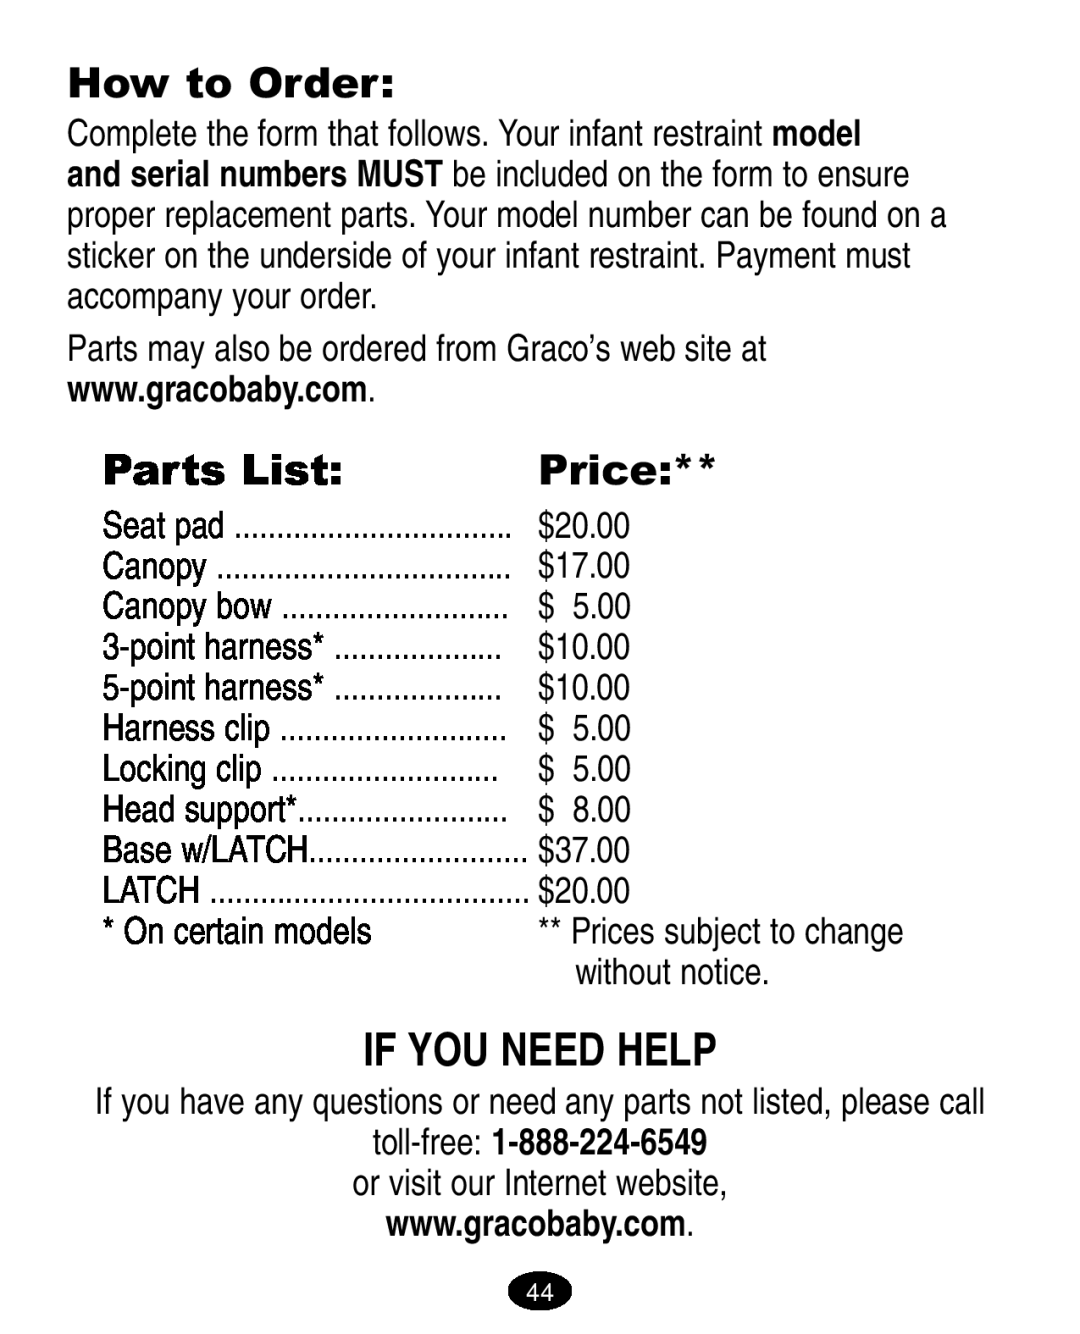 Graco ISPA005AA manual If You Need Help, How to Order, Parts List, Price, 5.00, 8.00, On certain models, toll-free 